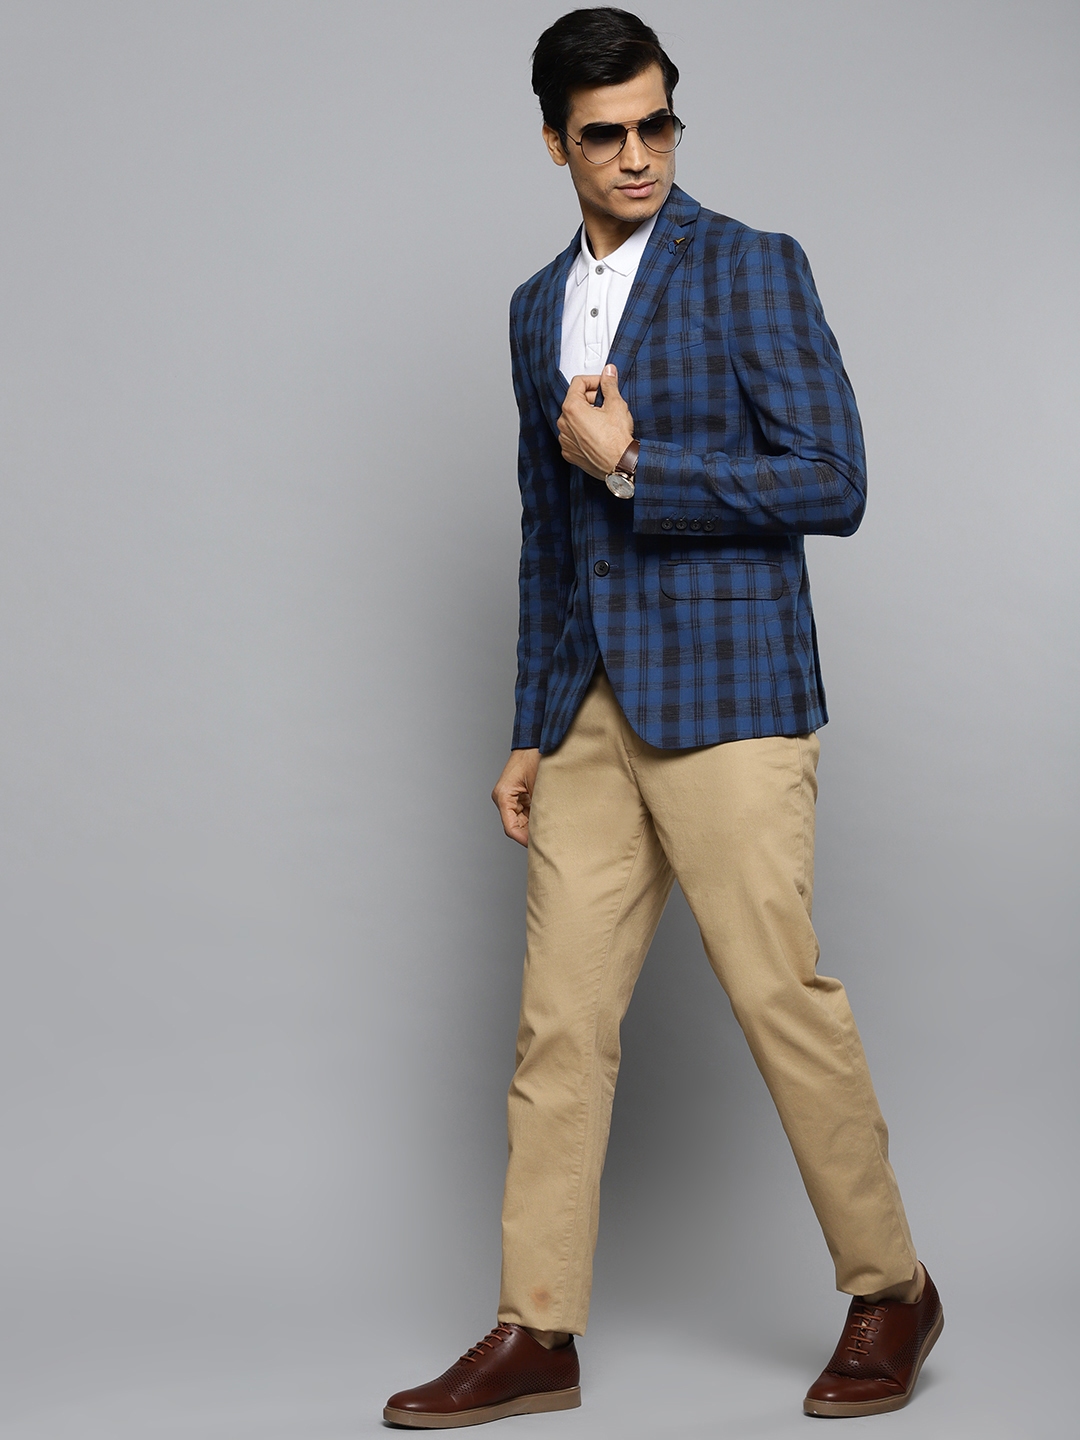 Blue Check Blazer Outfits For Men (177 ideas & outfits) | Lookastic